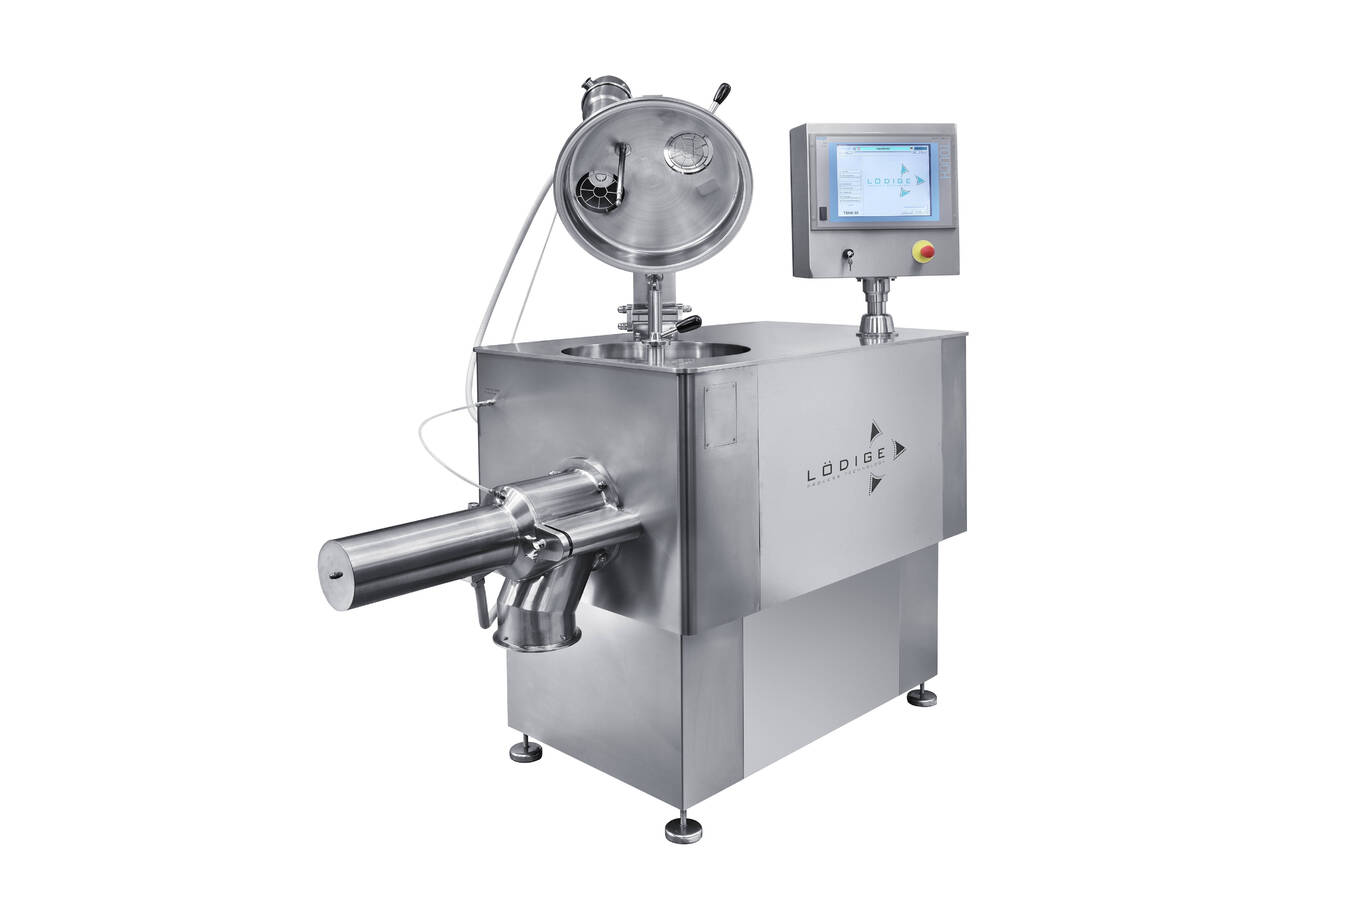 Lödige Process Technology has developed a granulator based on the Mixing Granulator type MGT especially for compacting bulk goods such as tea or cocoa. (Source: Lödige)